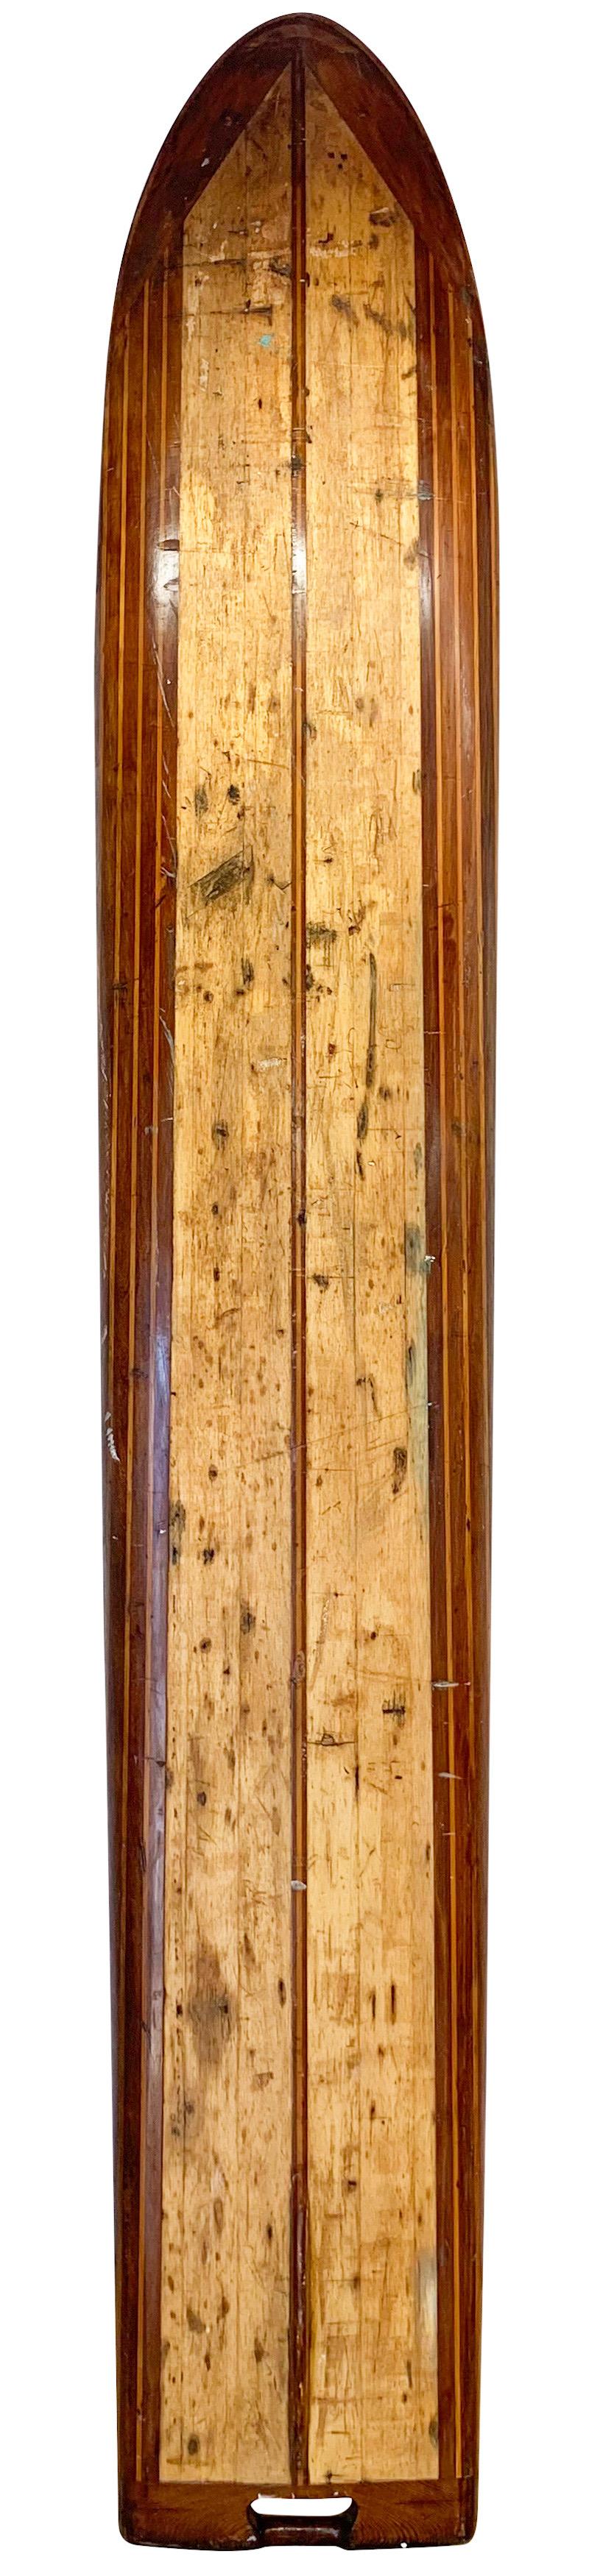 Late-1930s Pacific system Homes wood surfboard. Features an intricate design created with redwood and pine wood. Beautiful embellishments in the form of nose and tail blocks complete with an early style surfboard fin with low profile. This early